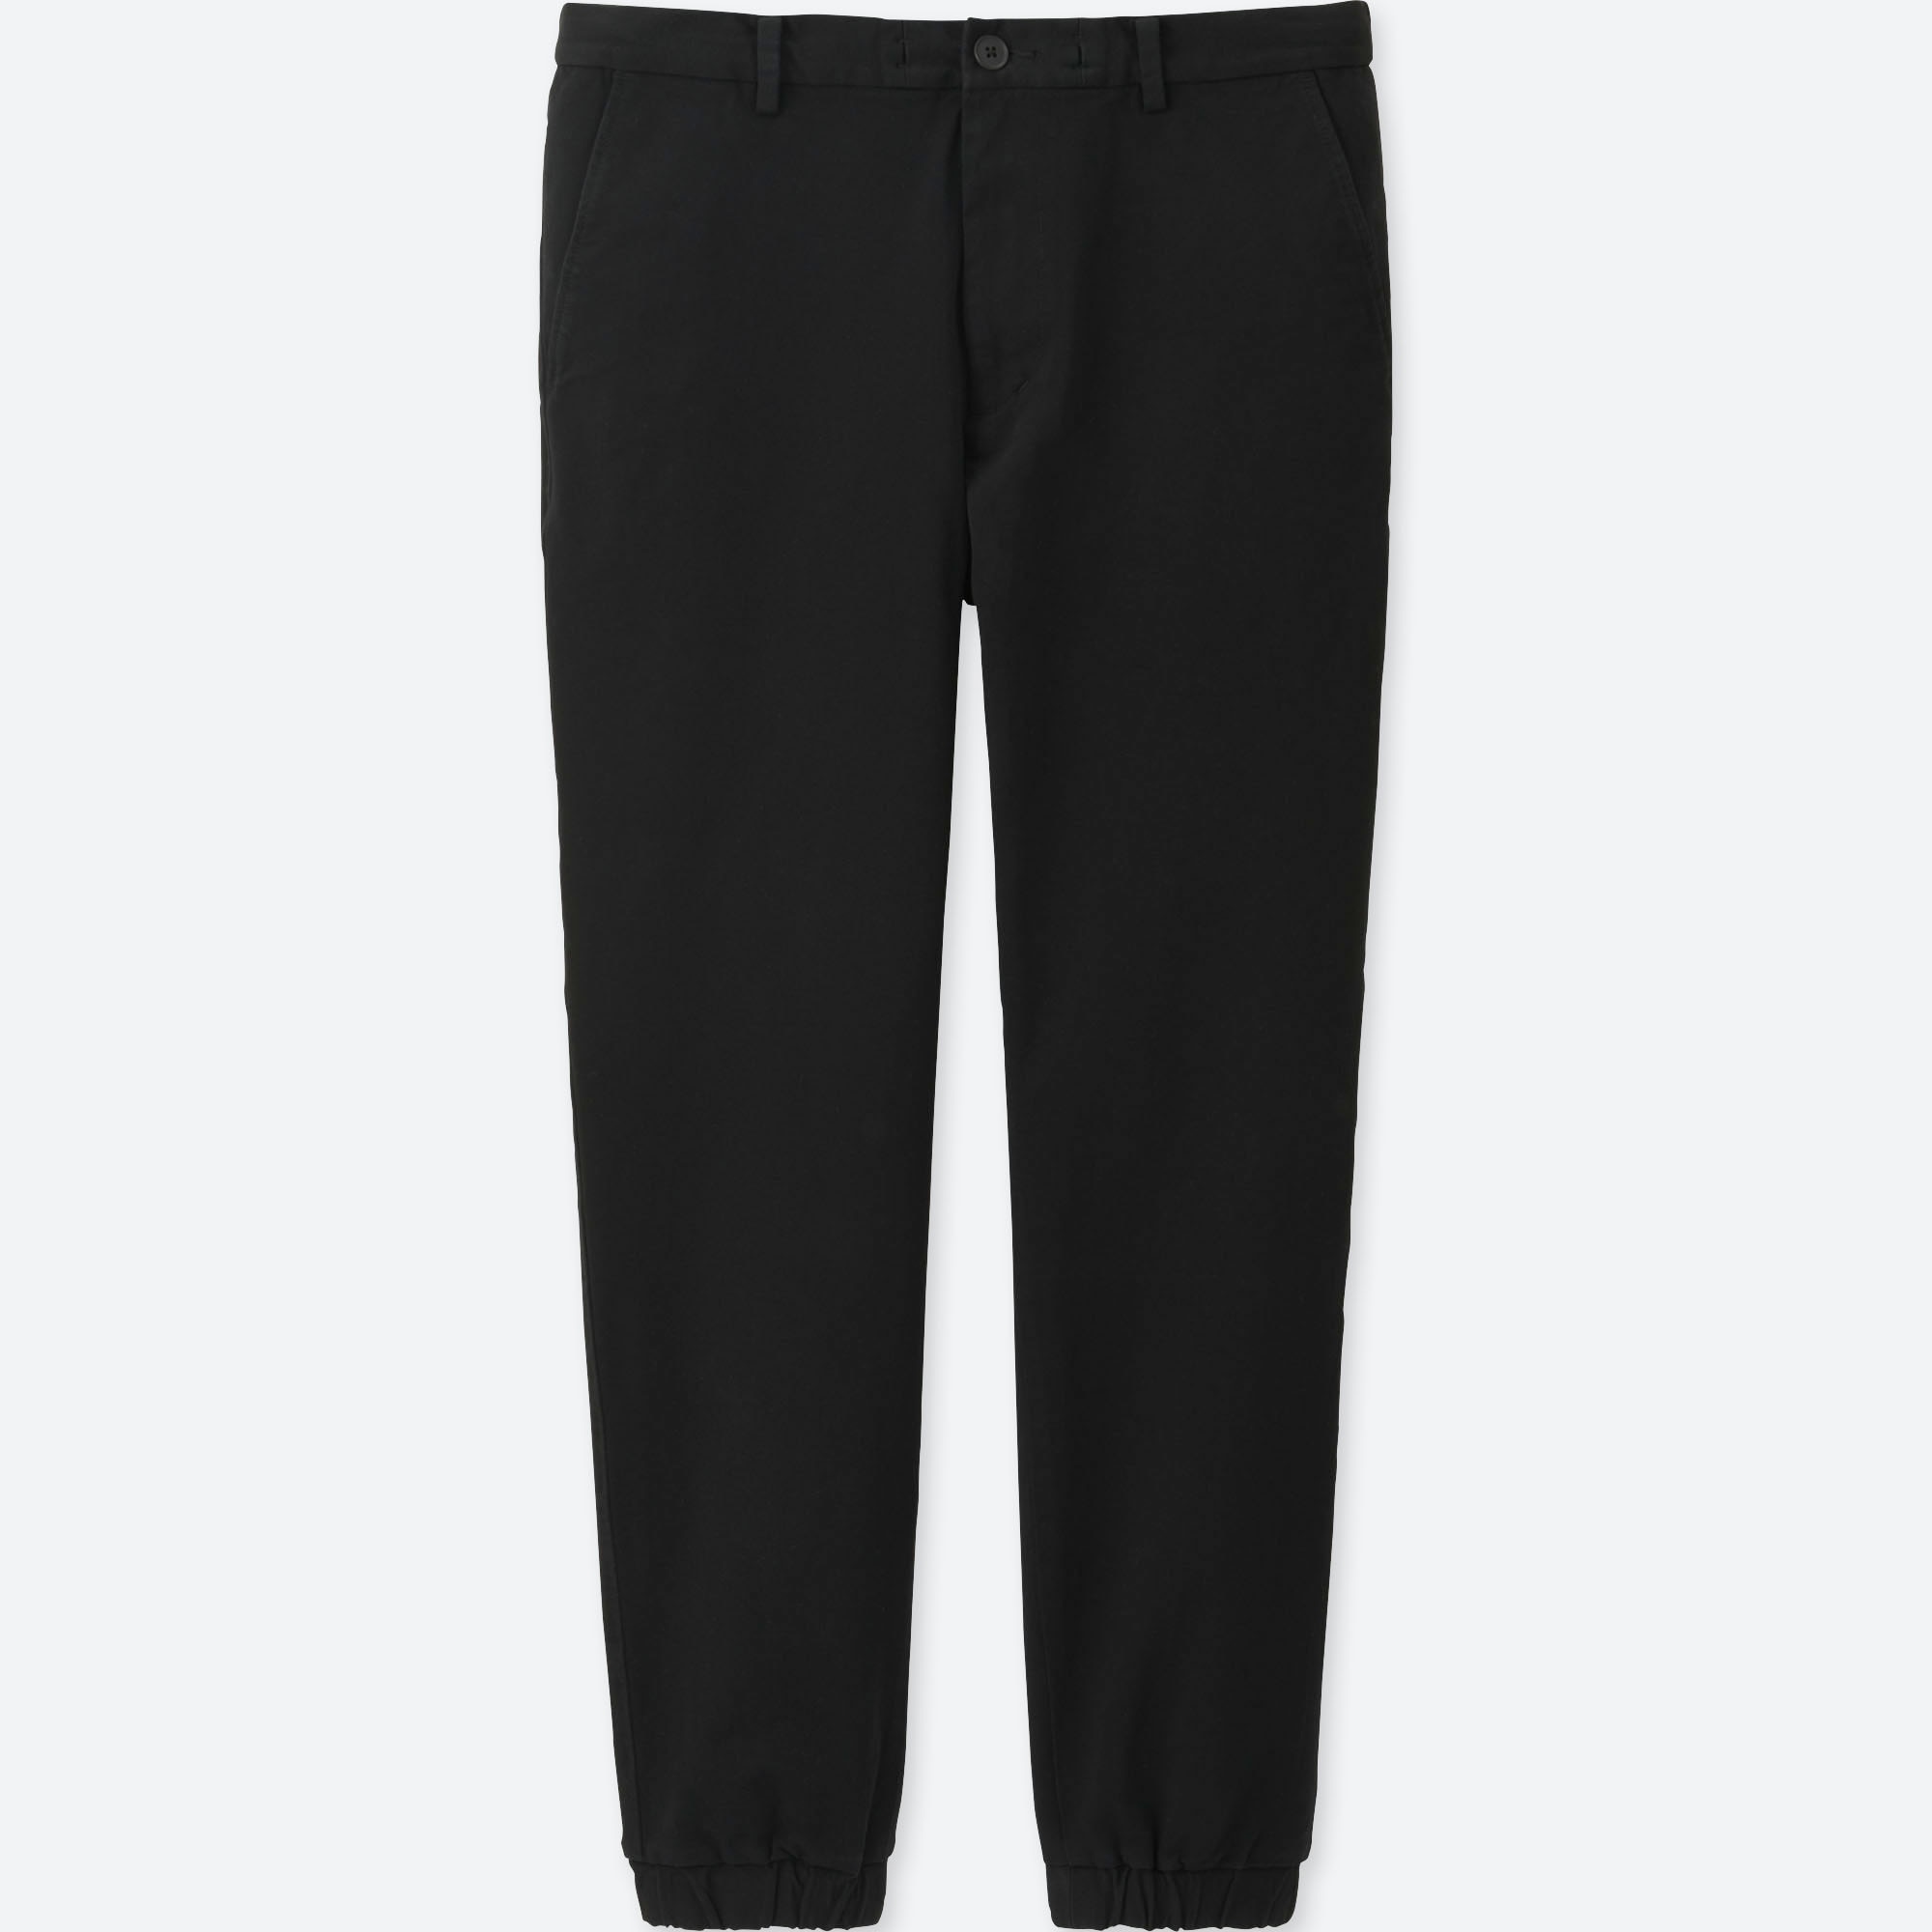 CARGO JOGGER PANTS SLIM FIT  UNIQLO VN